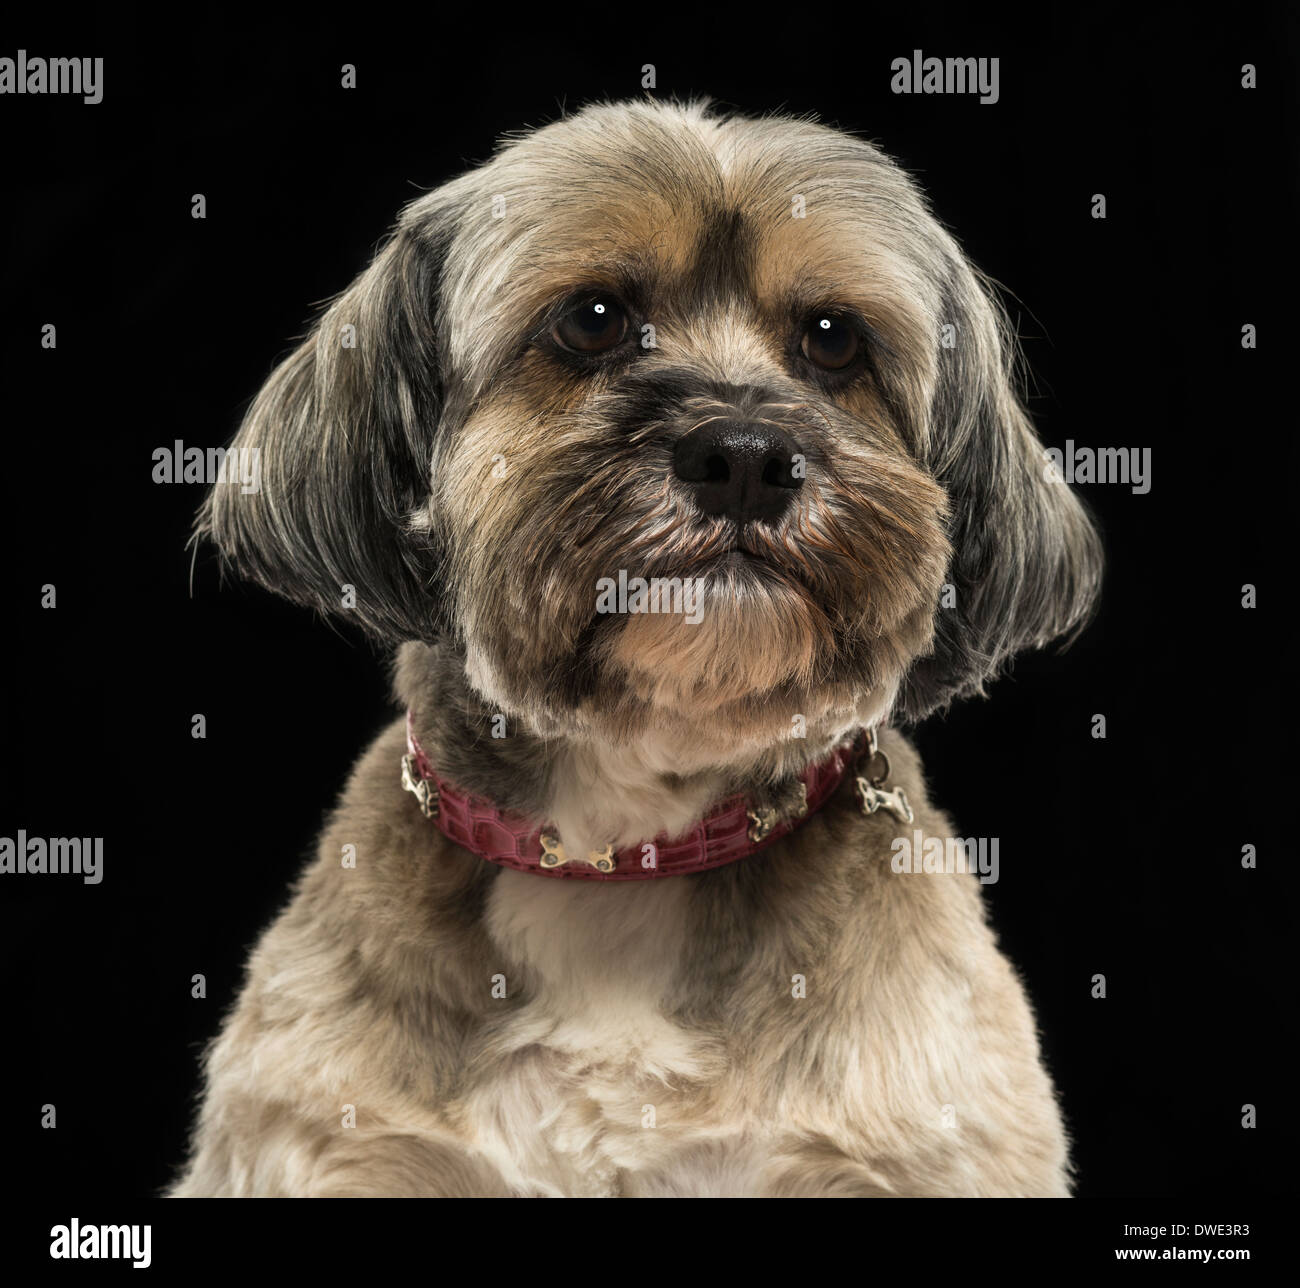 Close-up of a Lhasa apso, on a black background Stock Photo